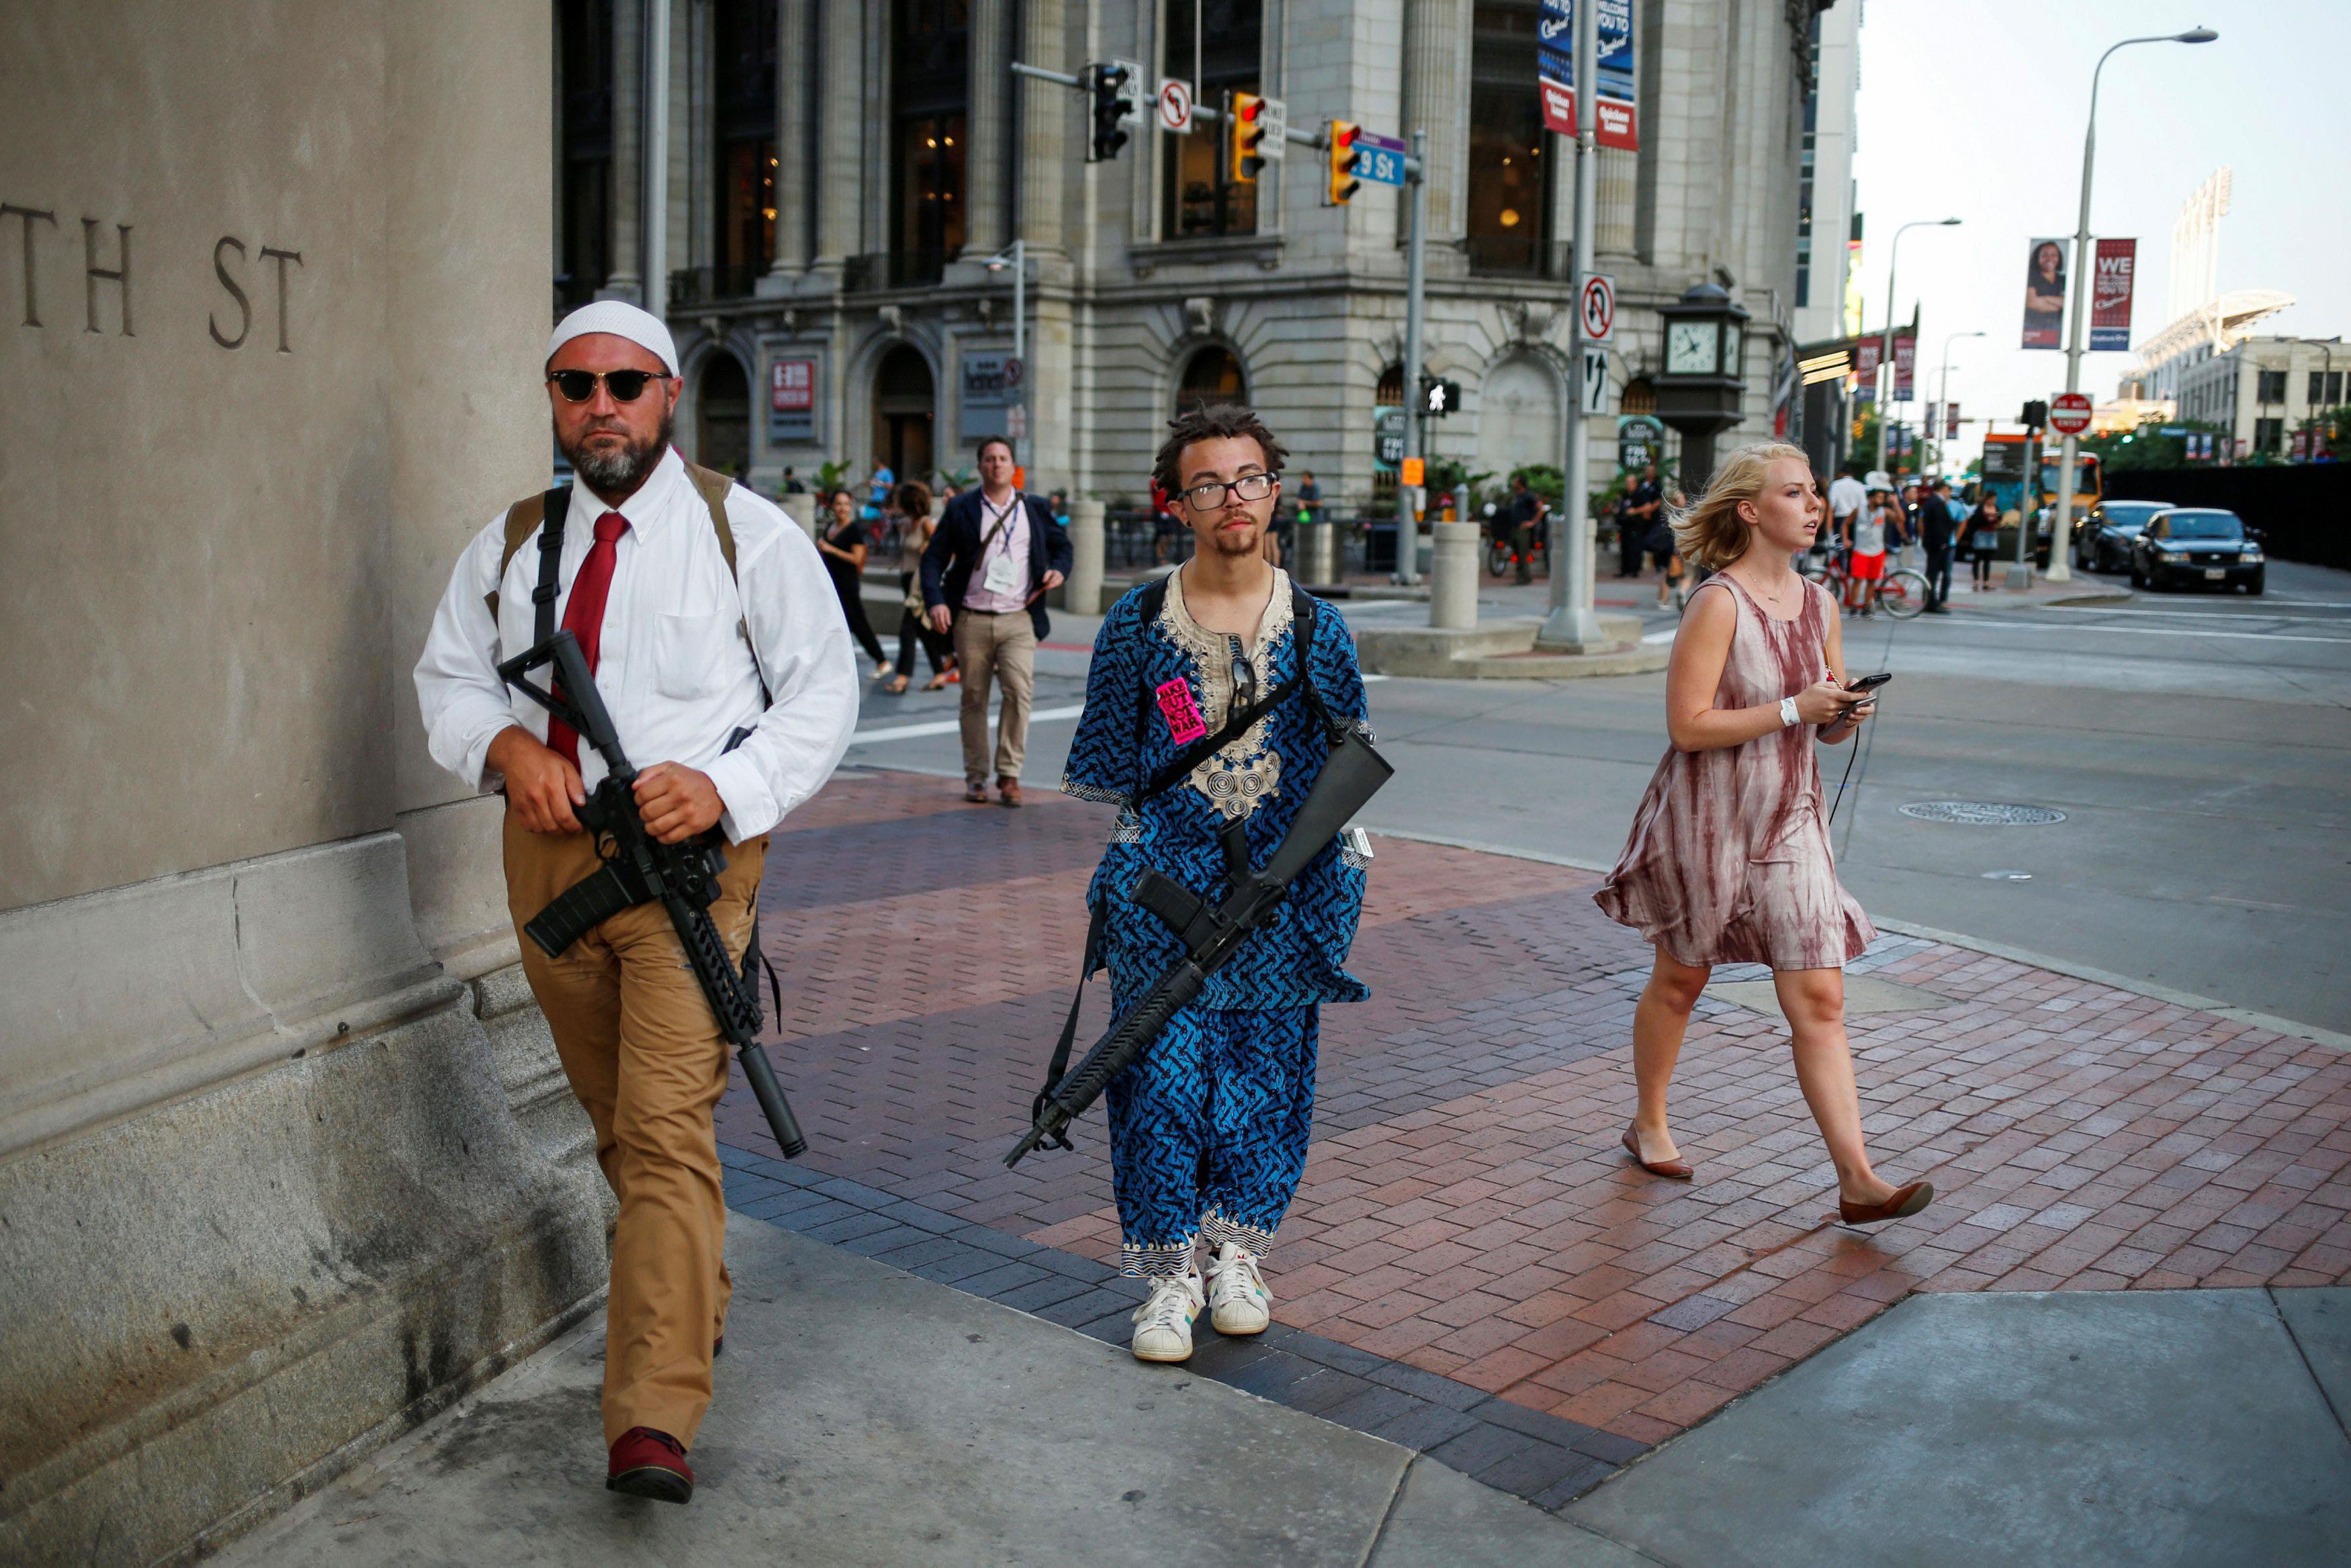 A woman walks past Micah Naziri and Jaimes Campbell, advocates for open carry, as they patrol the st